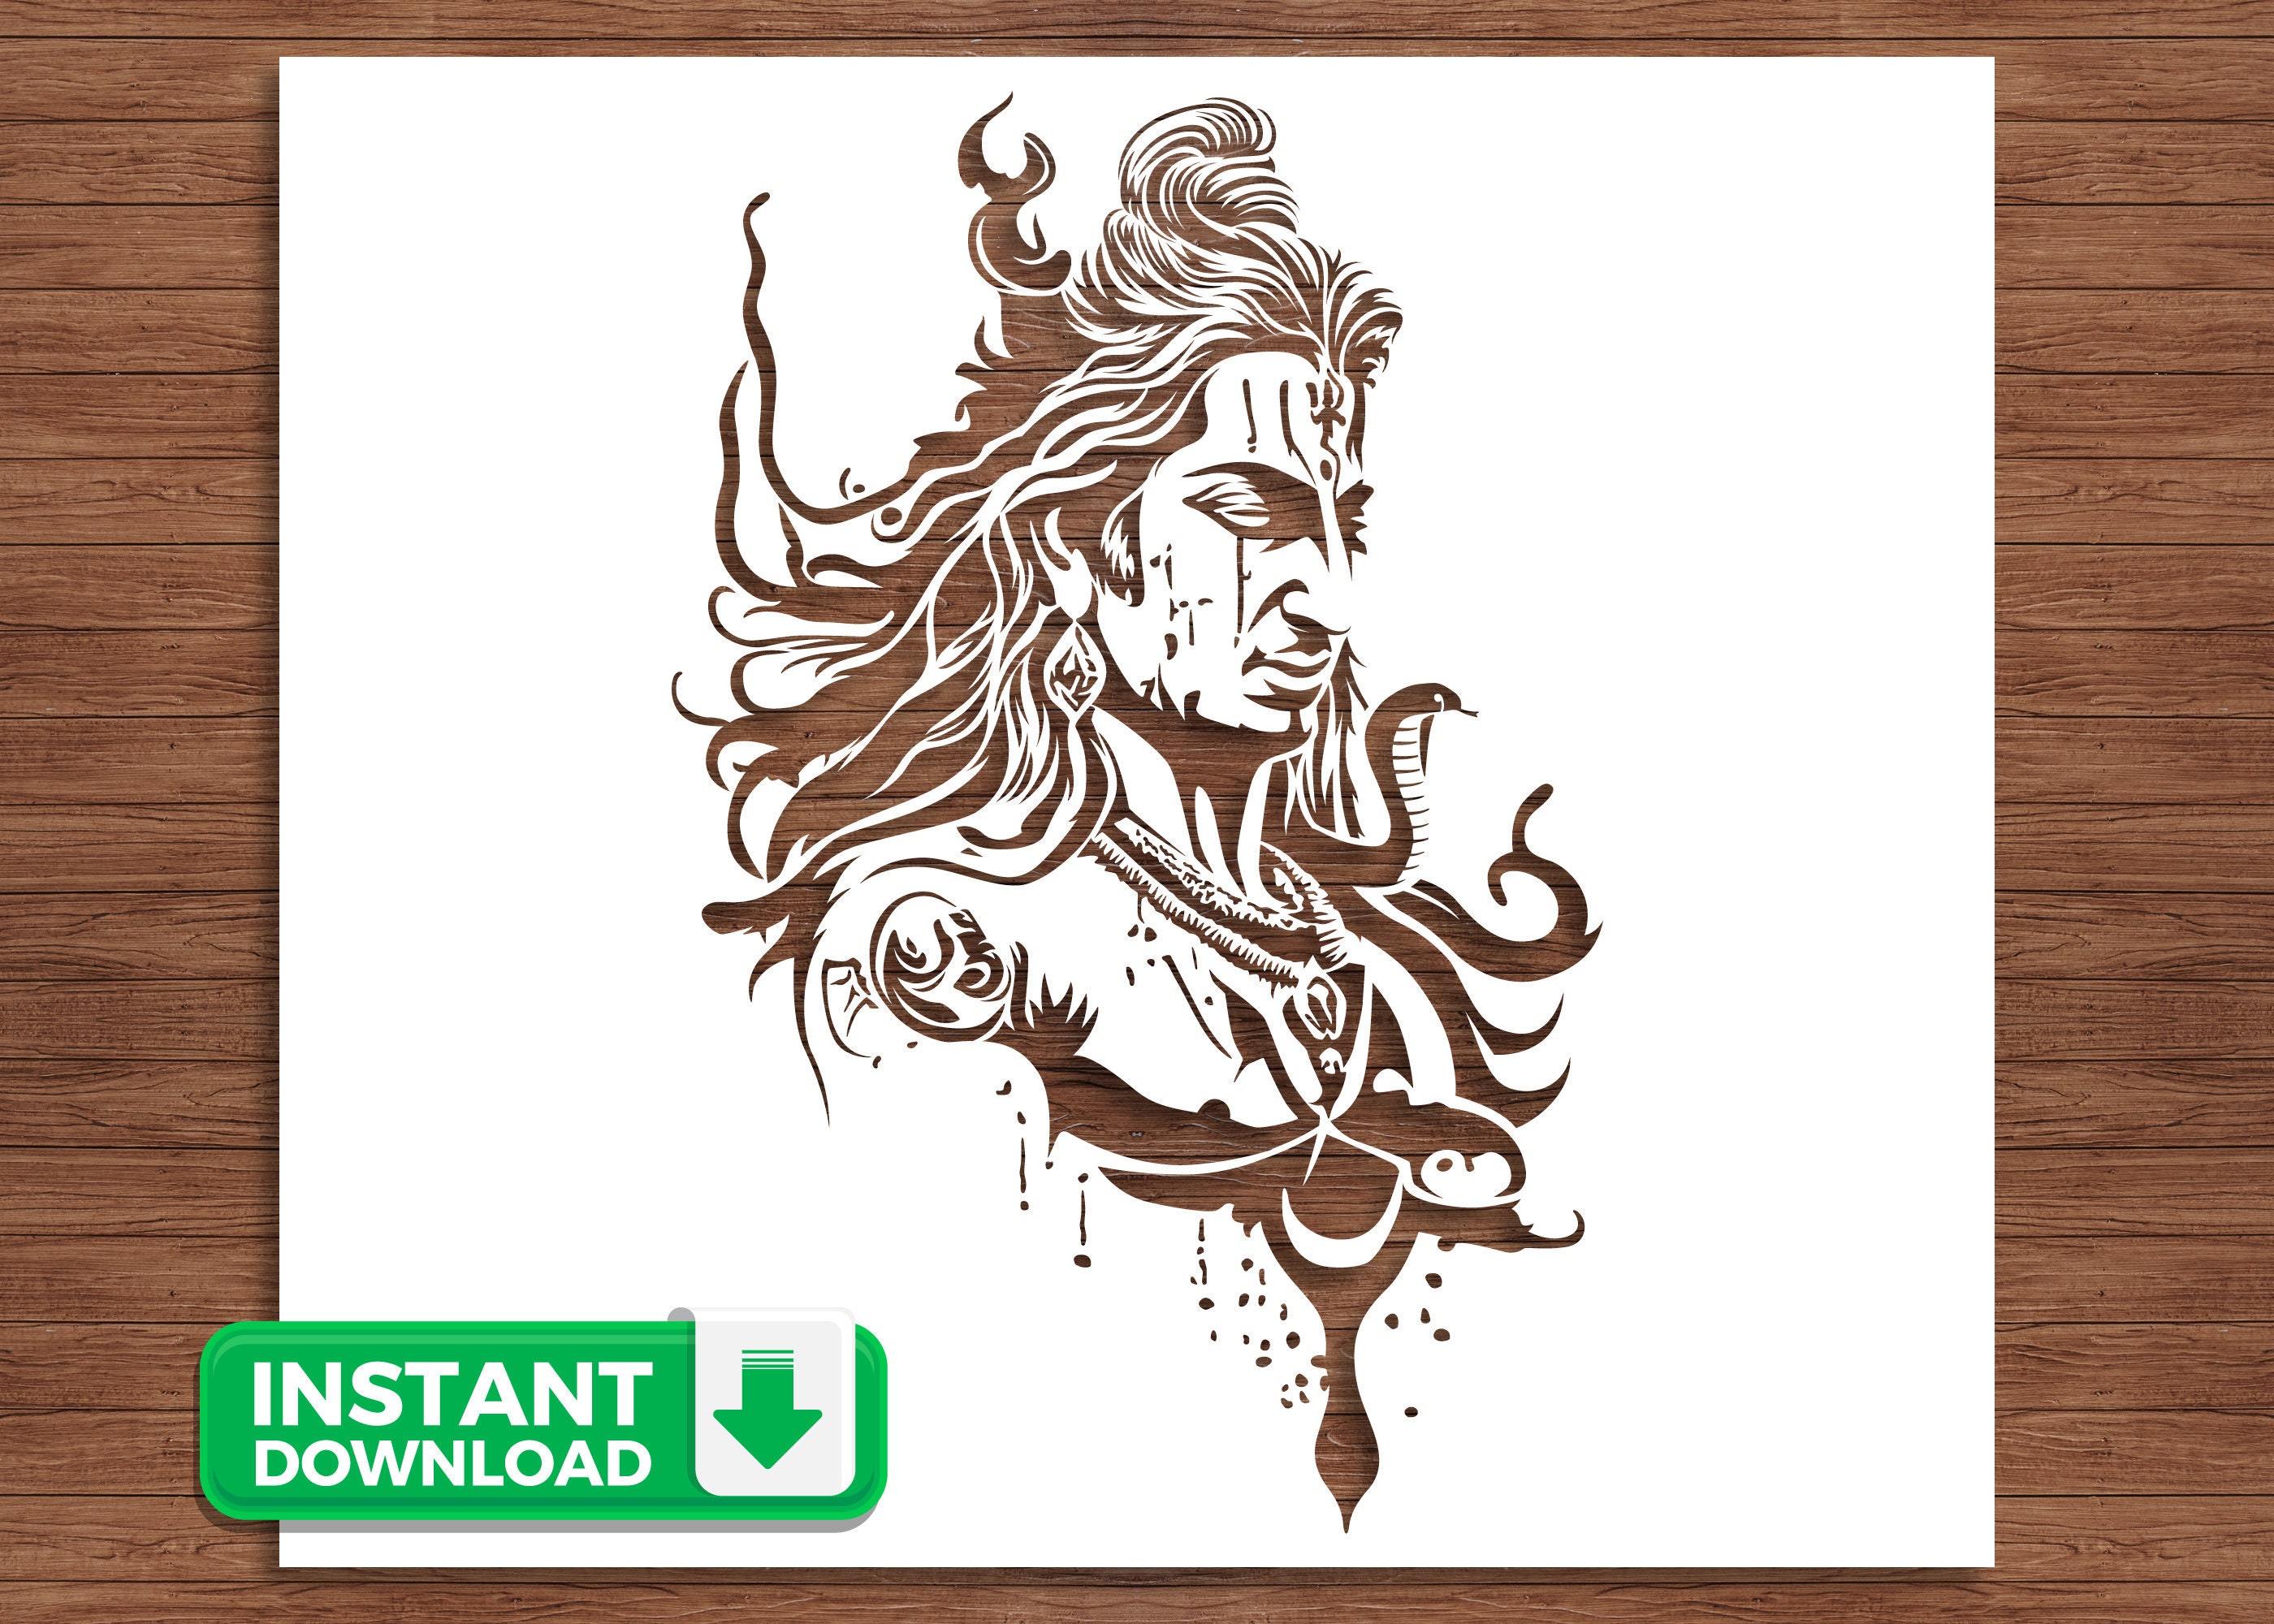 The Lord Shiva Drawing by Abhishekjaiswal - Pixels